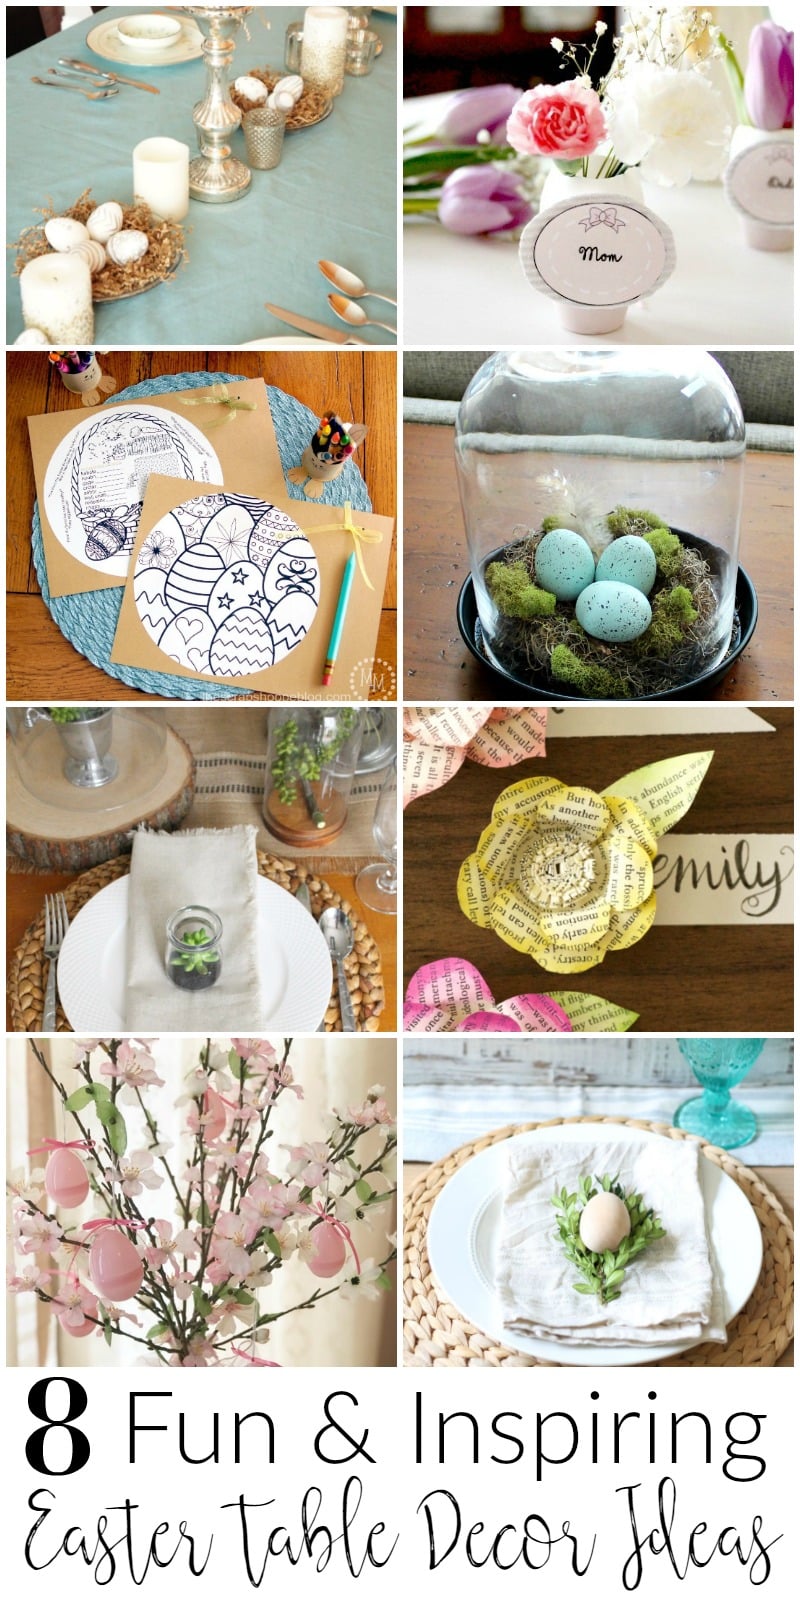 Easter table decor ideas collage